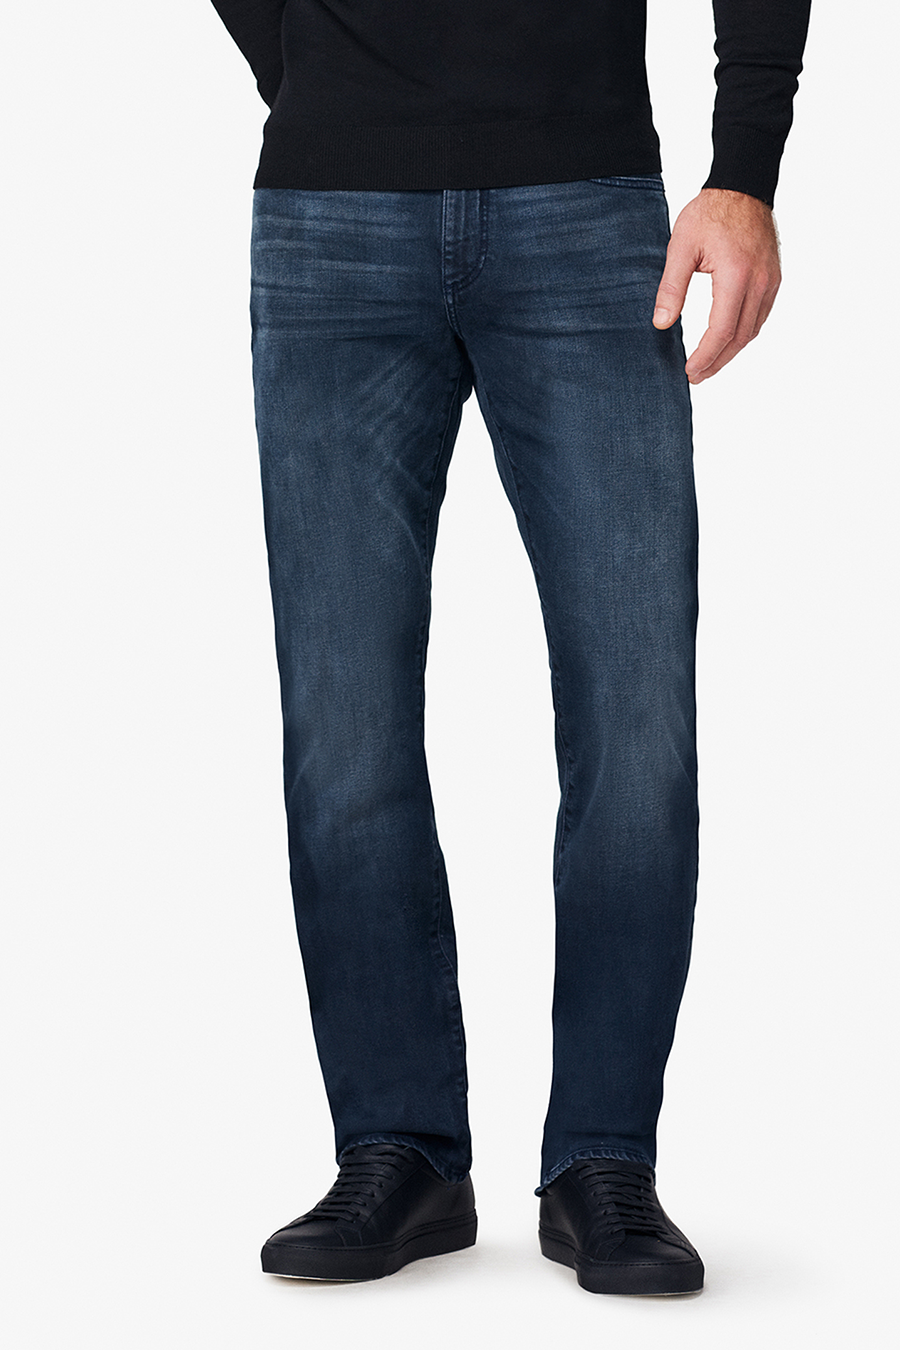 Cooper Tapered Slim | Fuel - Main Image Number 1 of 1